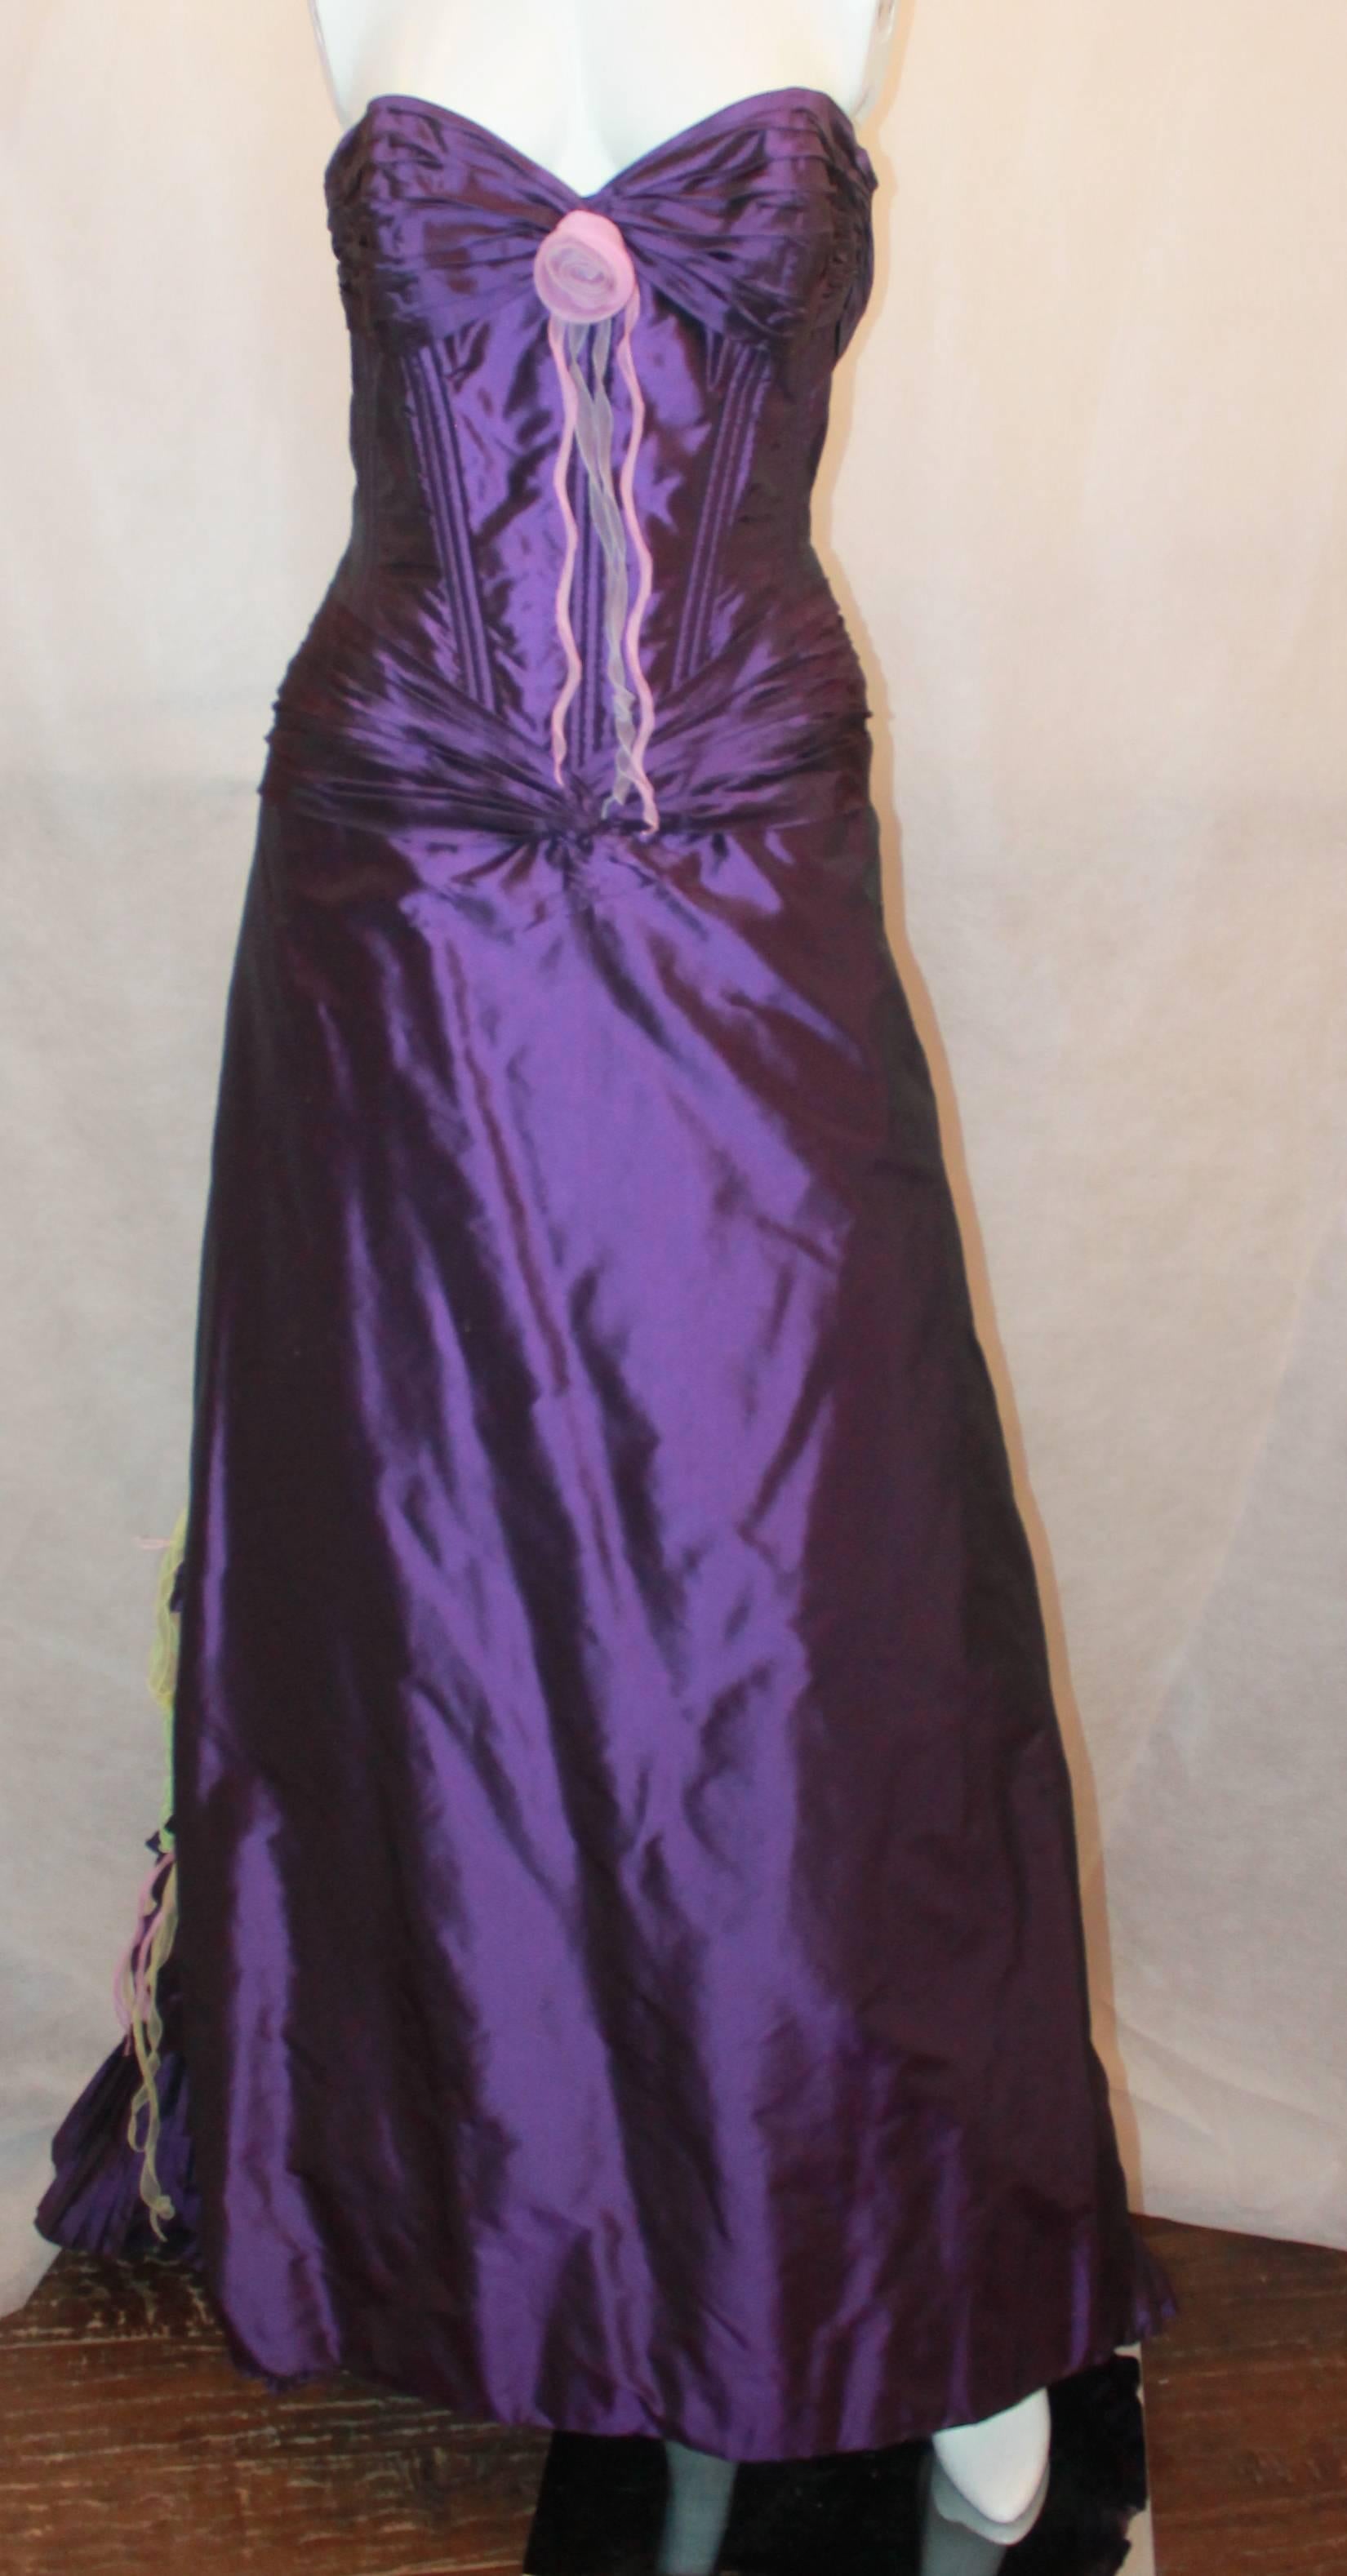 Vicky Tiel Purple Silk Taffeta Strapless Gown w/ Organza Floral Detail On Back - 42.  This special gown is in excellent condition.  This dress features a purple silk taffeta material, built-in corset to the hips, organza flower detail in the front